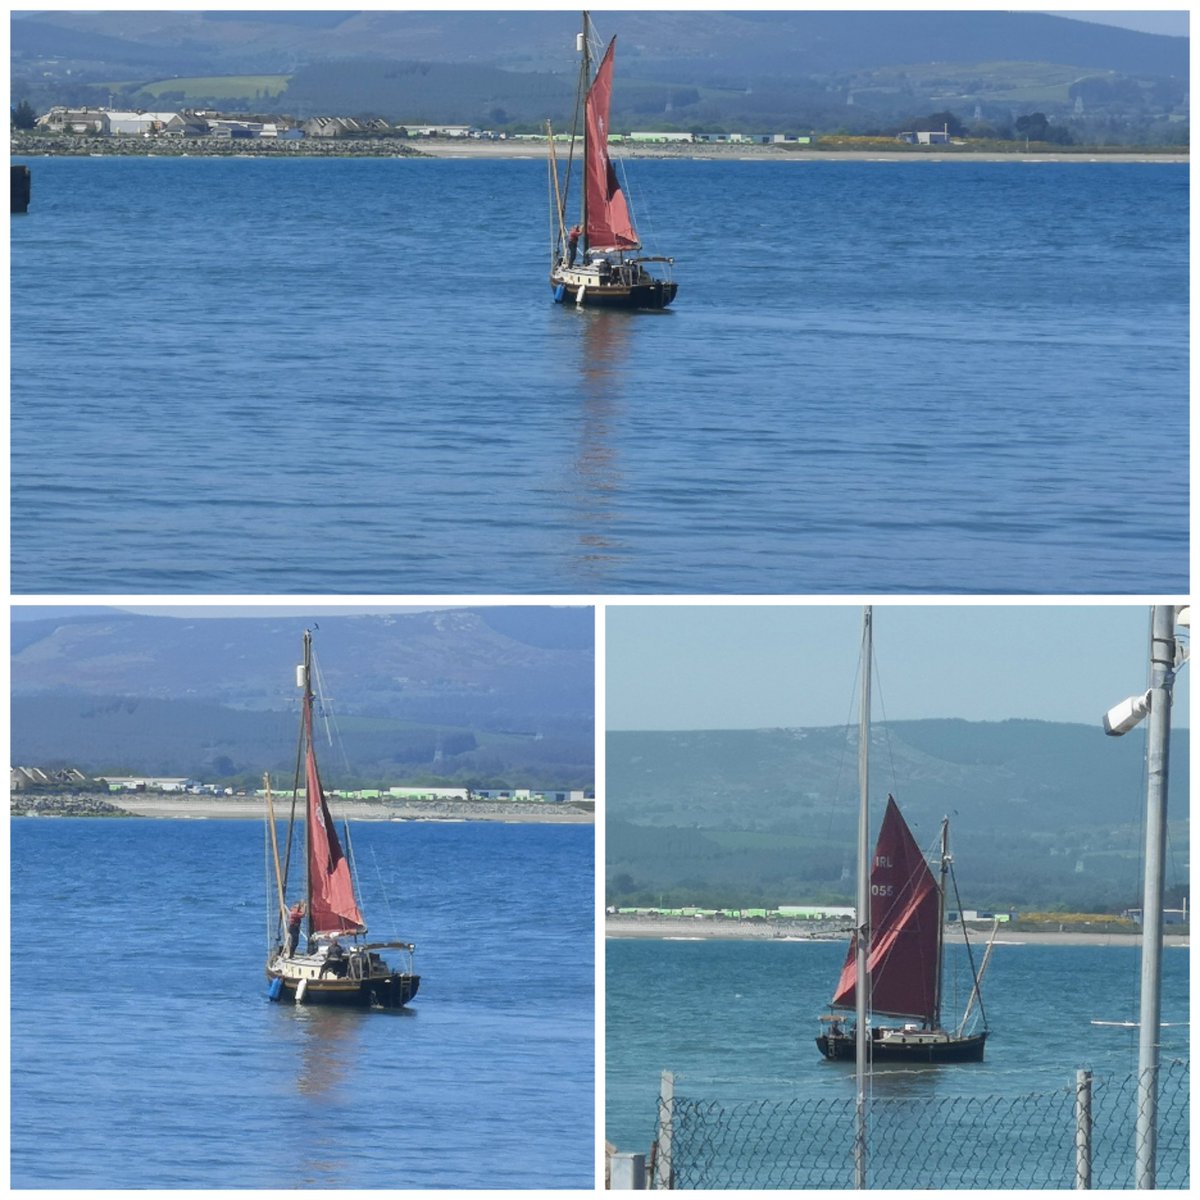 Lovely to see summer visitors beginning to come & go in our wonderful Wicklow!!⛵🌞

#lovewicklow #sailing #wicklowharbour